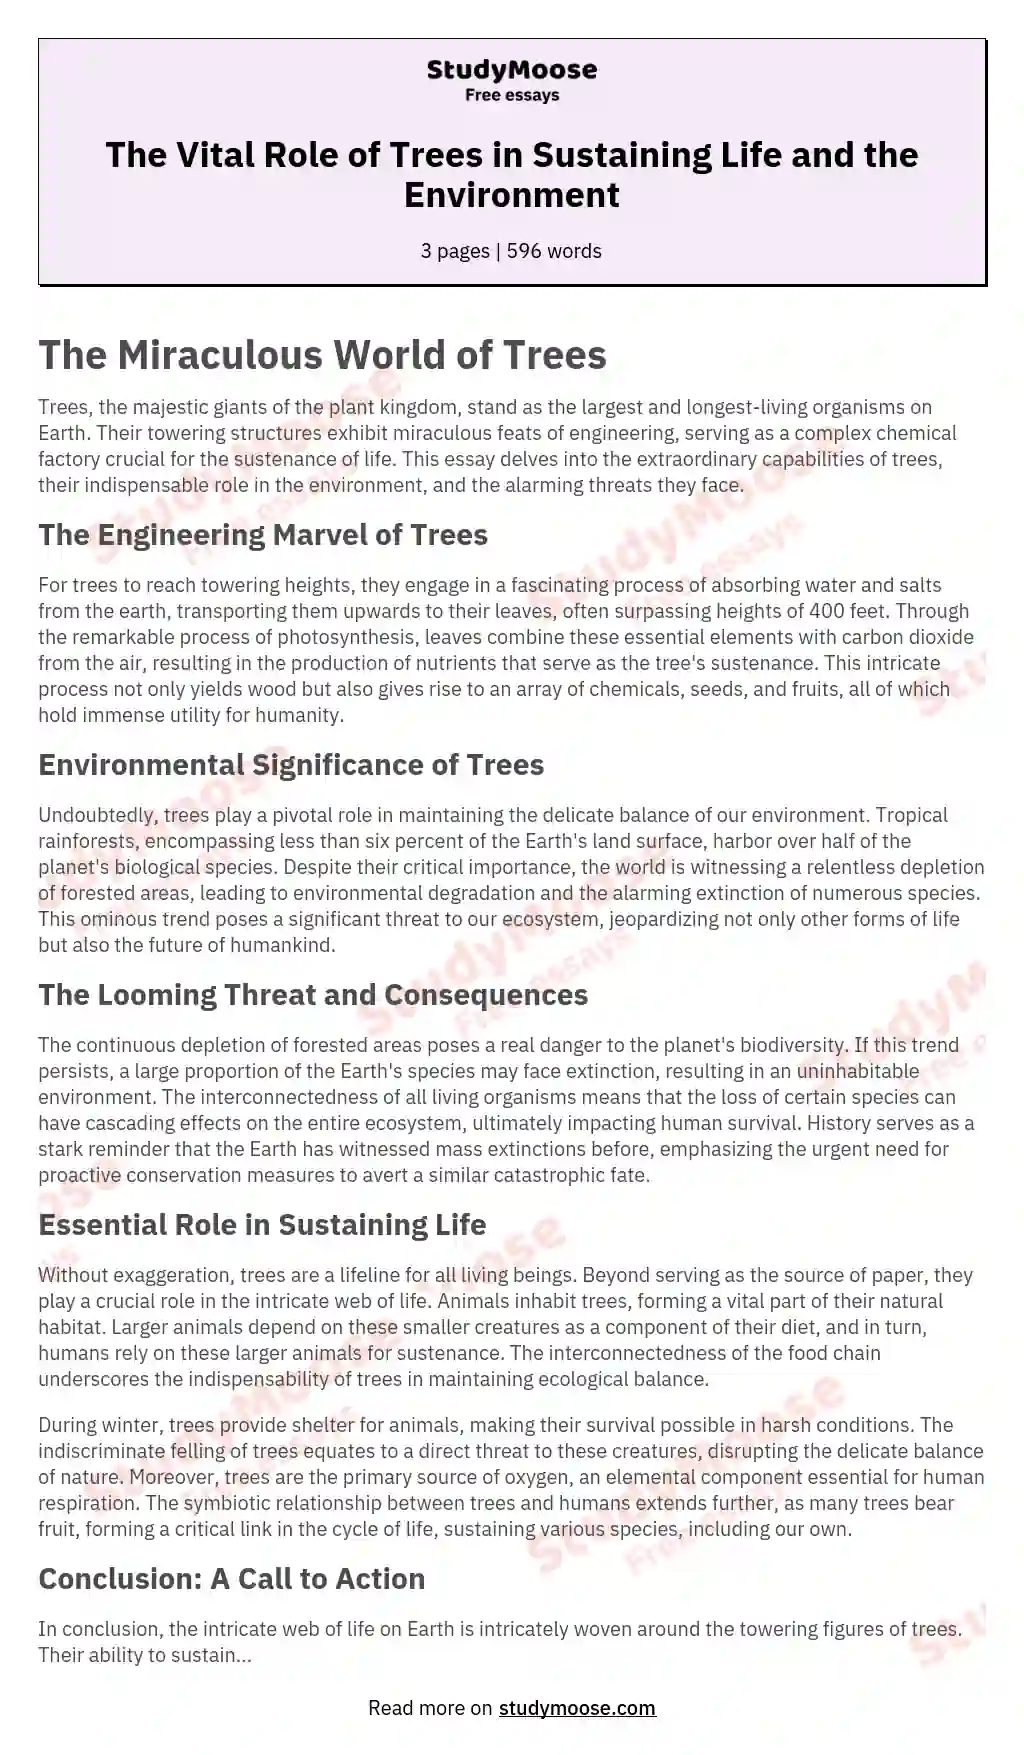 The Vital Role of Trees in Sustaining Life and the Environment essay